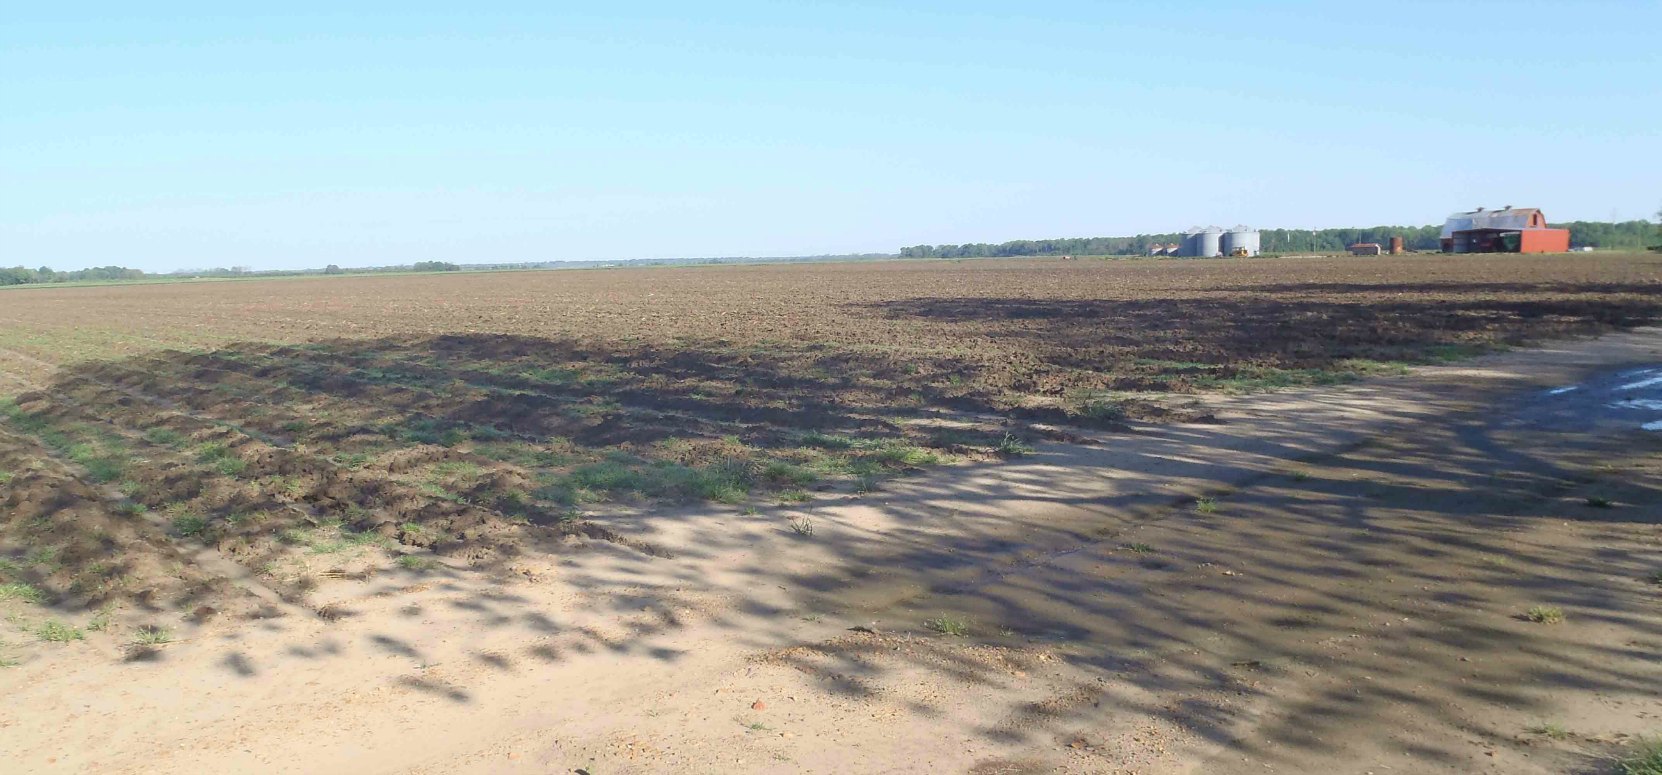 View of the Stovall farms fields from the Muddy Waters House site. This is typical of the geography of Coahoma County around Clarksdale, Mississippi.